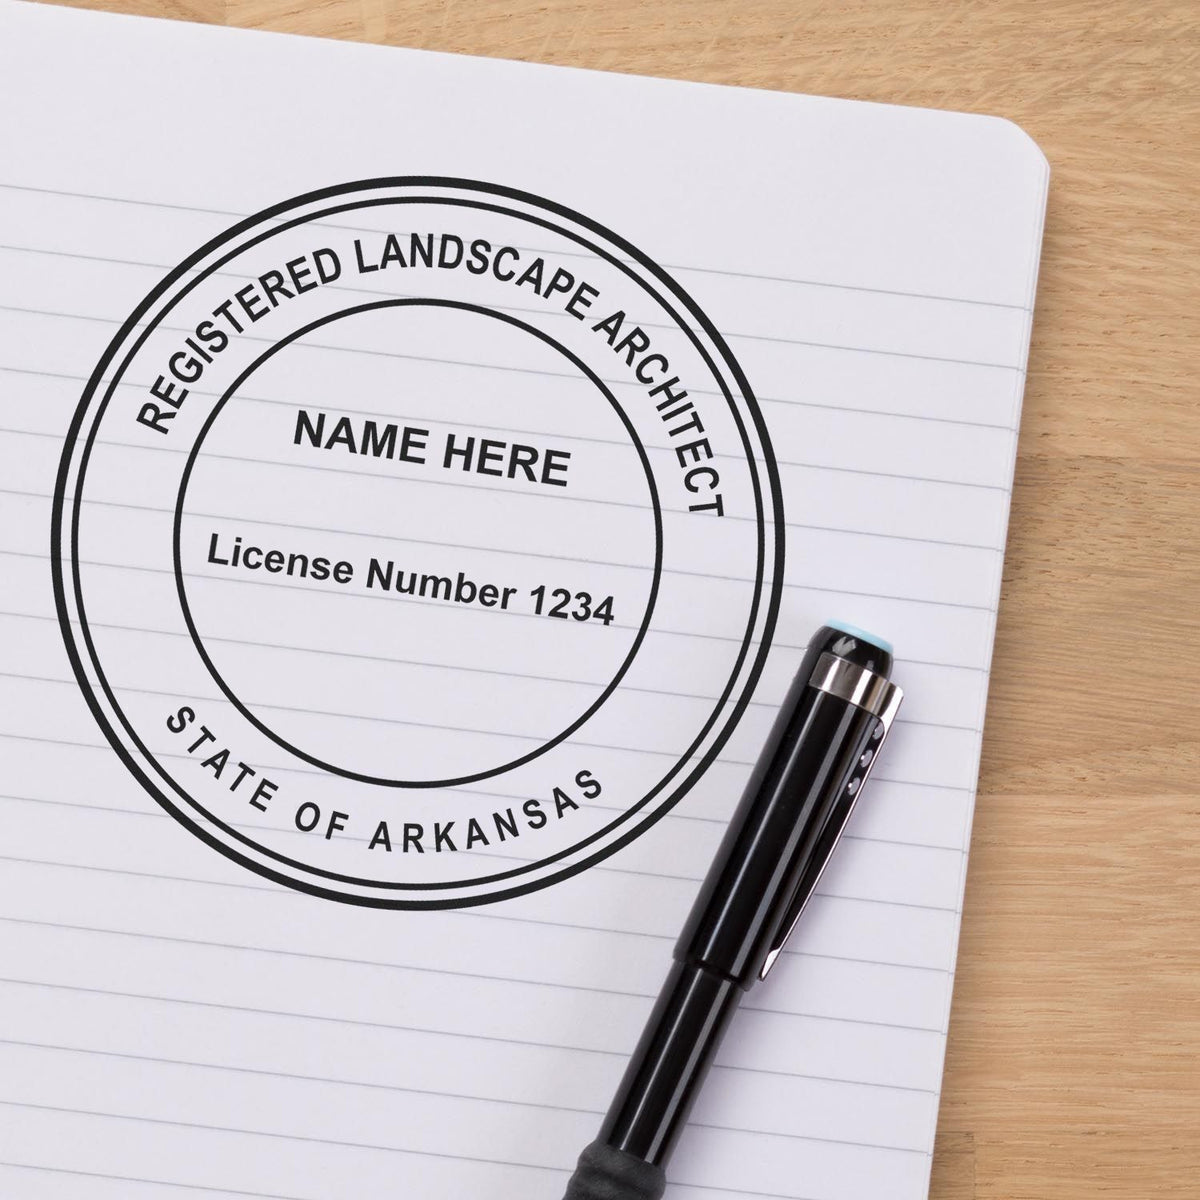 A lifestyle photo showing a stamped image of the Digital Arkansas Landscape Architect Stamp on a piece of paper